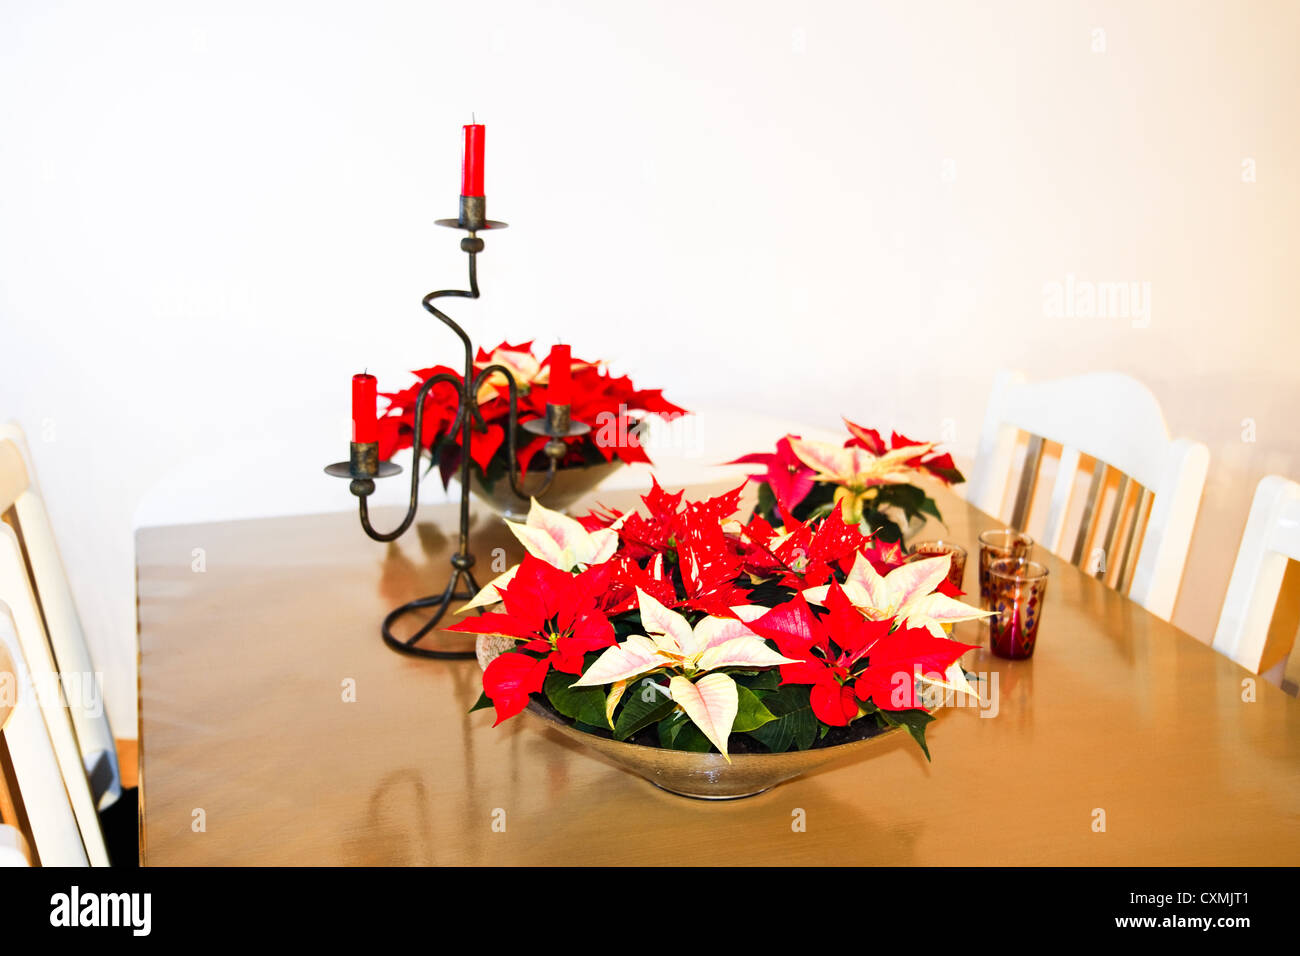 Christmas plant, Poinsettia or Euphorbia pulcherrima as decoration on a table in December - horizontal image Stock Photo